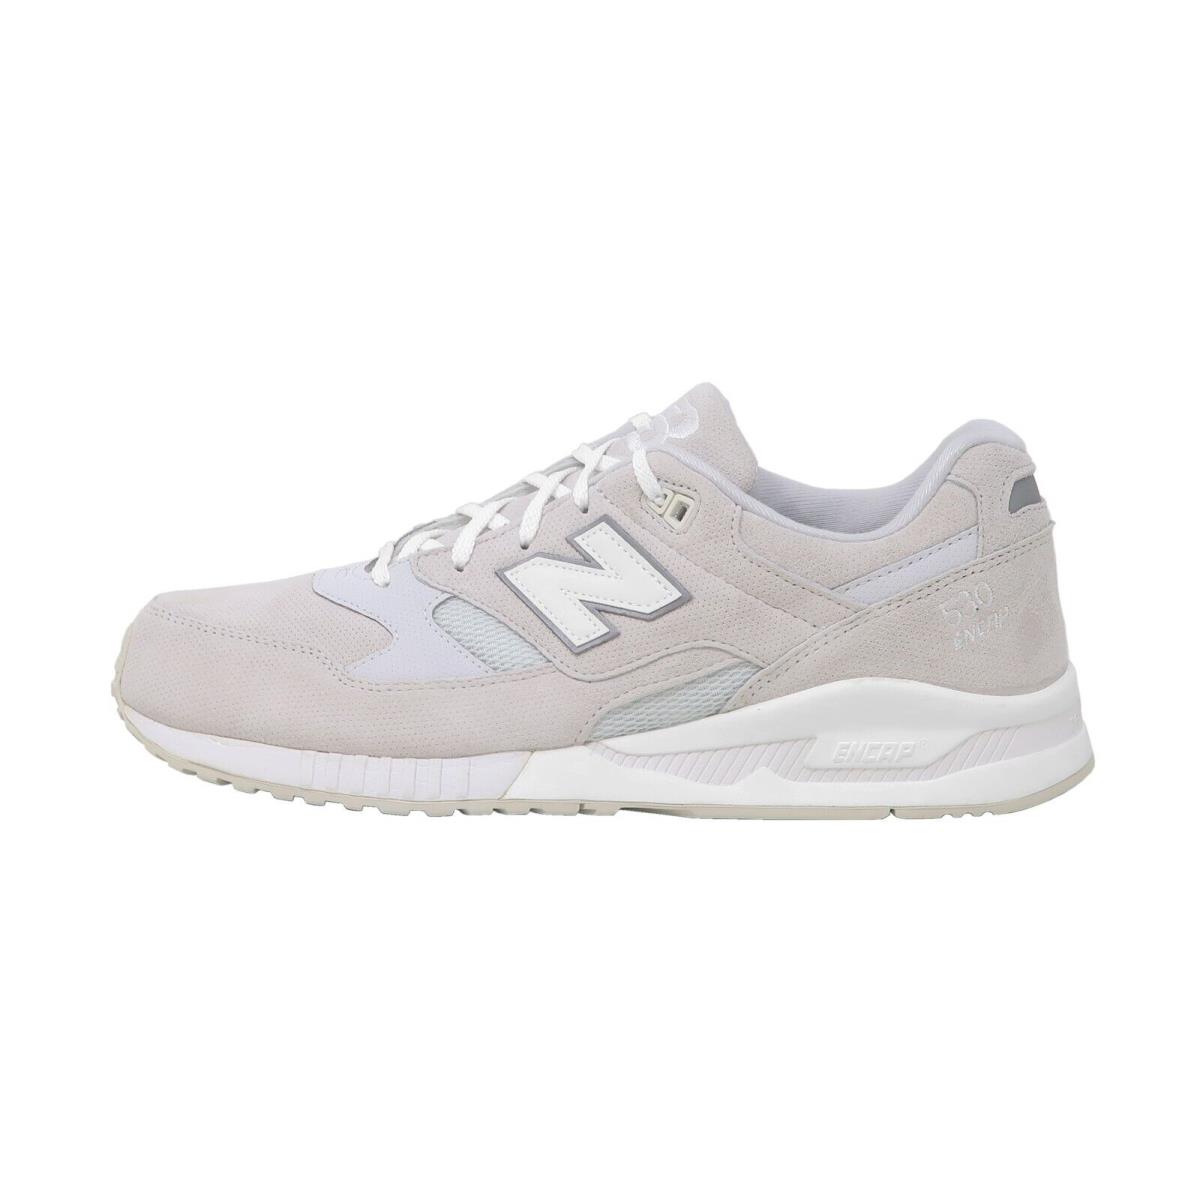 New Balance 530 Men`s Running Shoes Sneakers M530AW - Grey/white